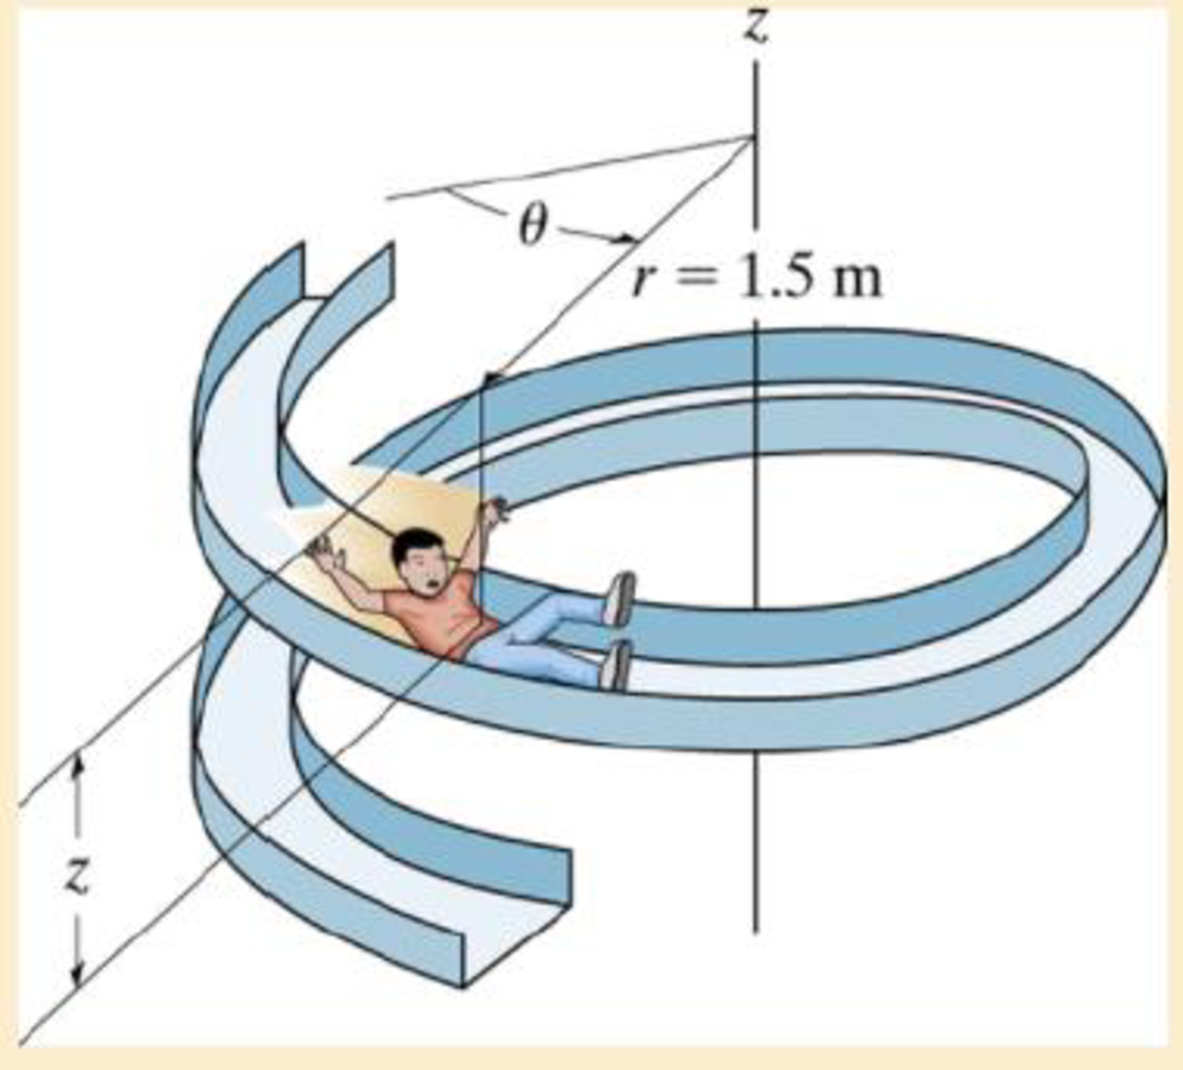 Chapter 13.6, Problem 89P, The boy of mass 40 kg is sliding down the spiral slide at a constant speed such that his position, 